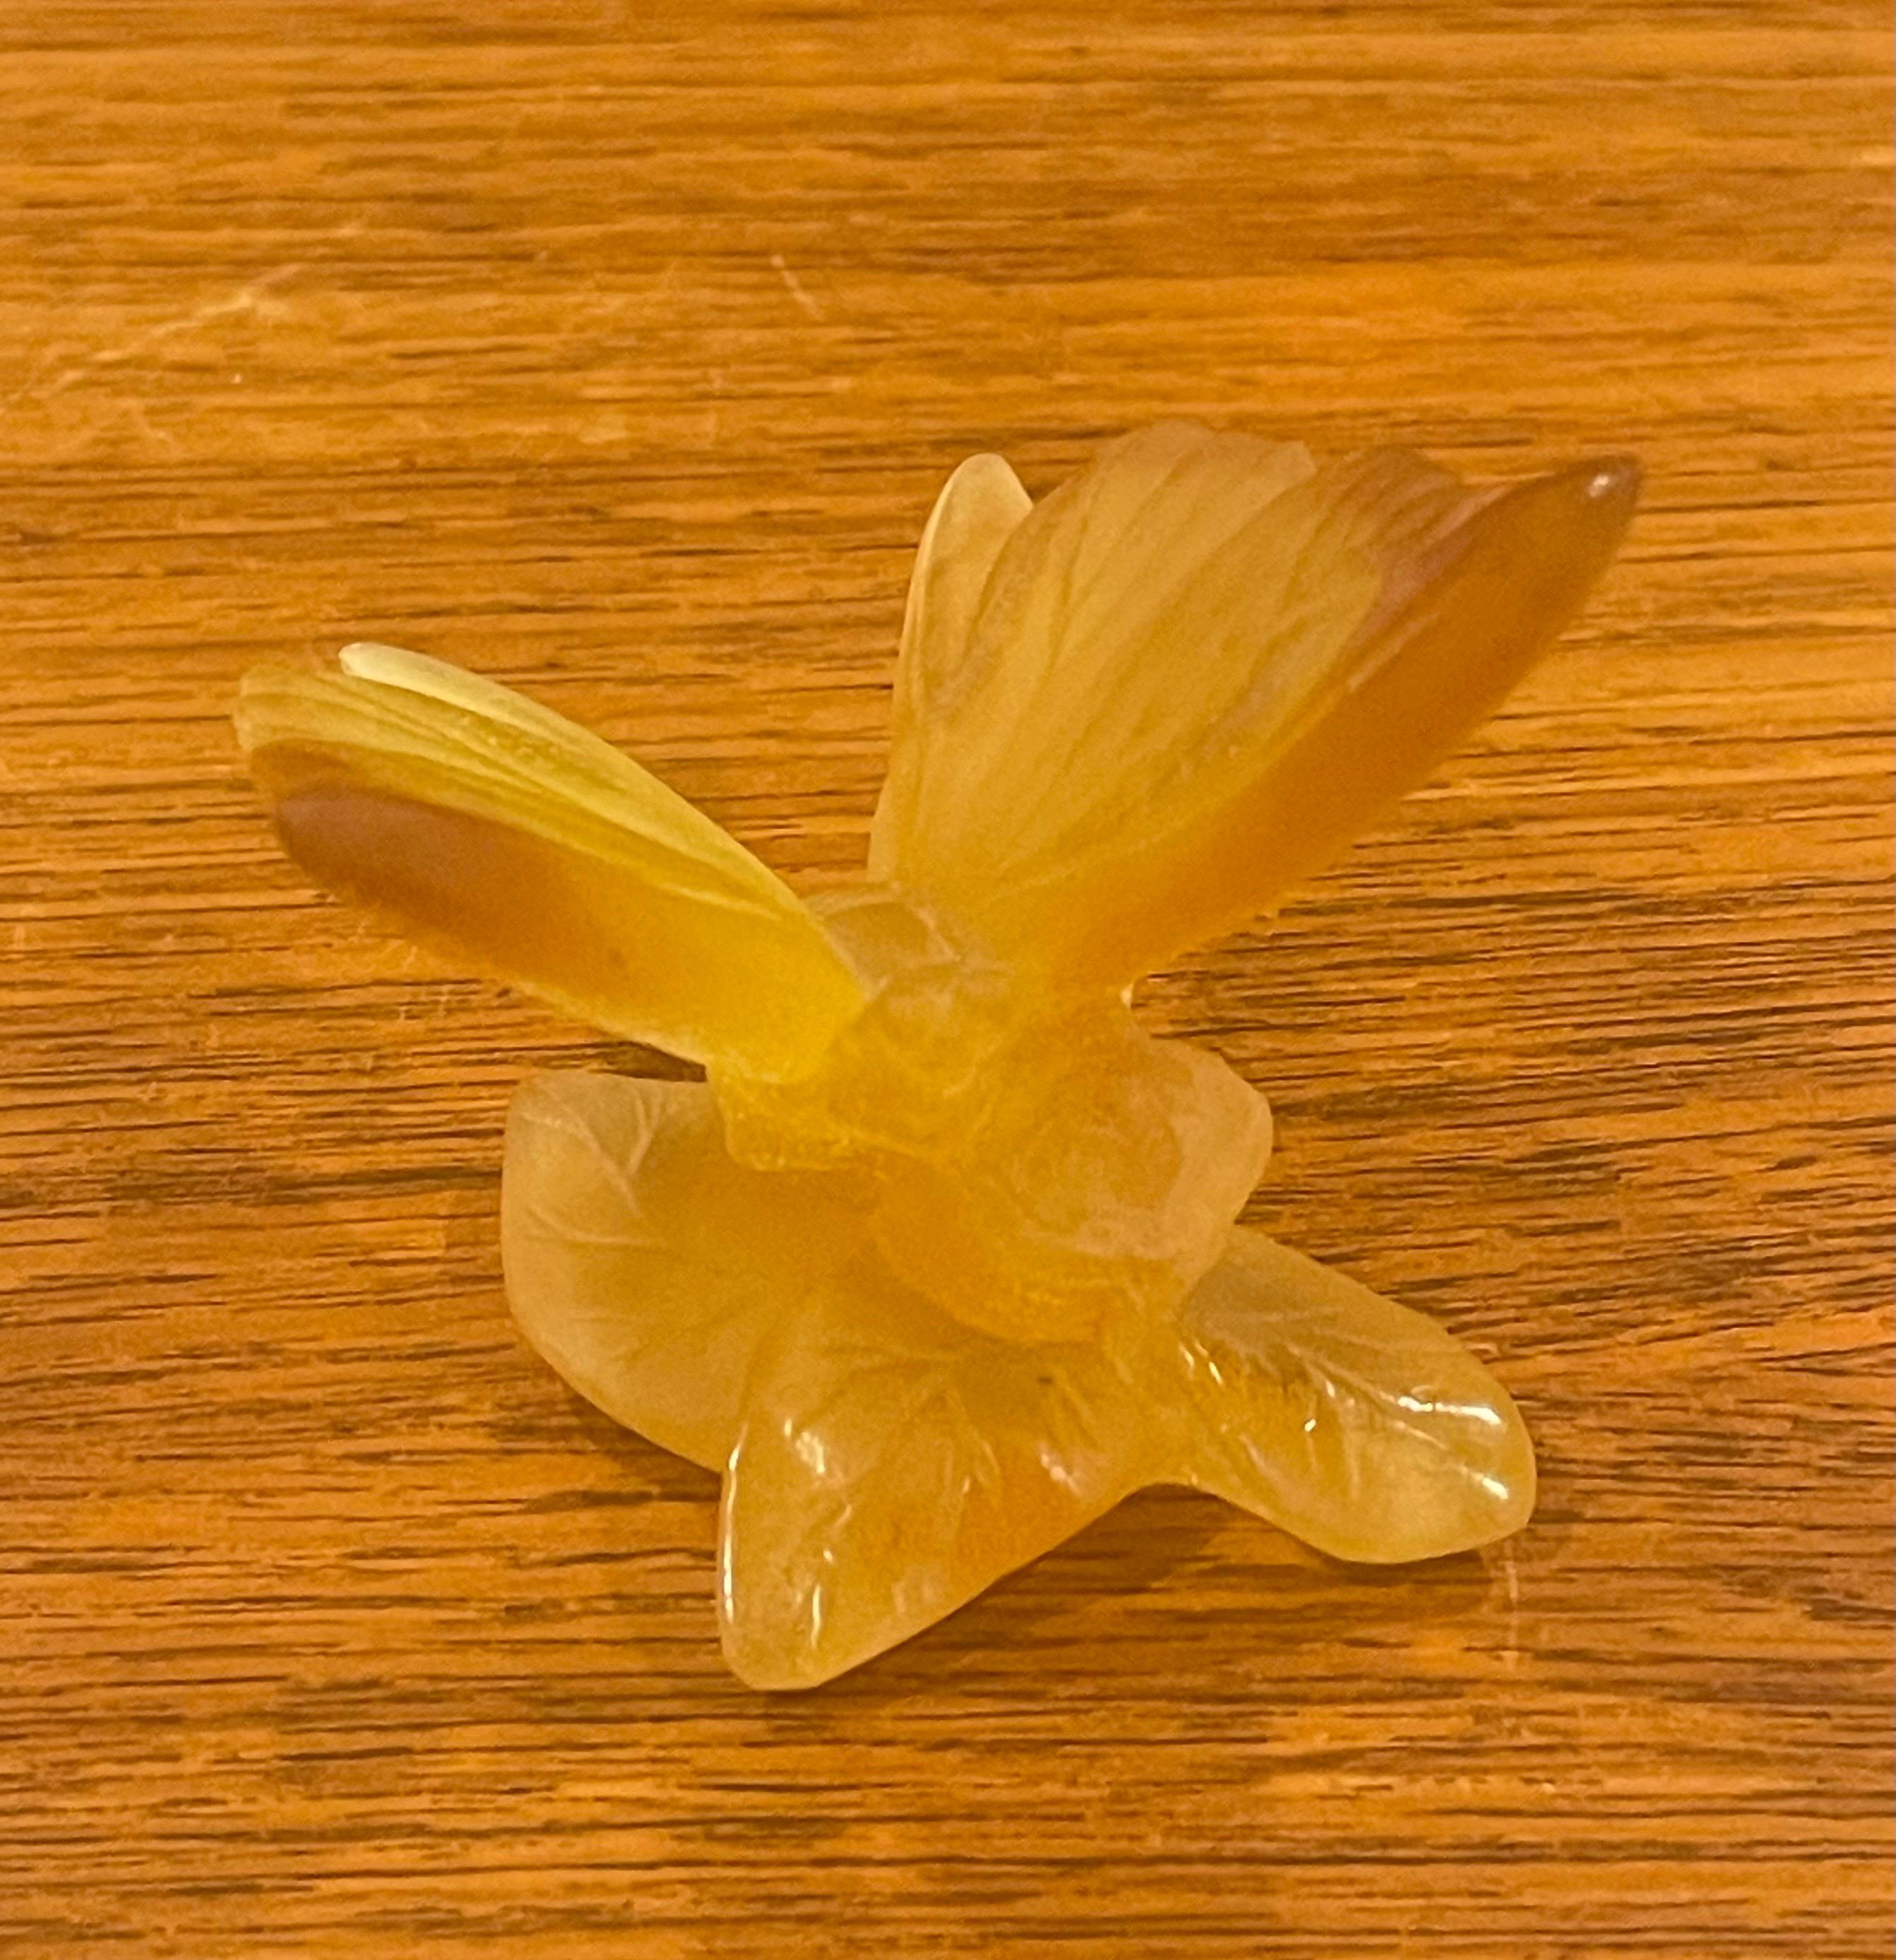 Small Crystal Butterfly Sculpture / Paperweight by Daum, France 2